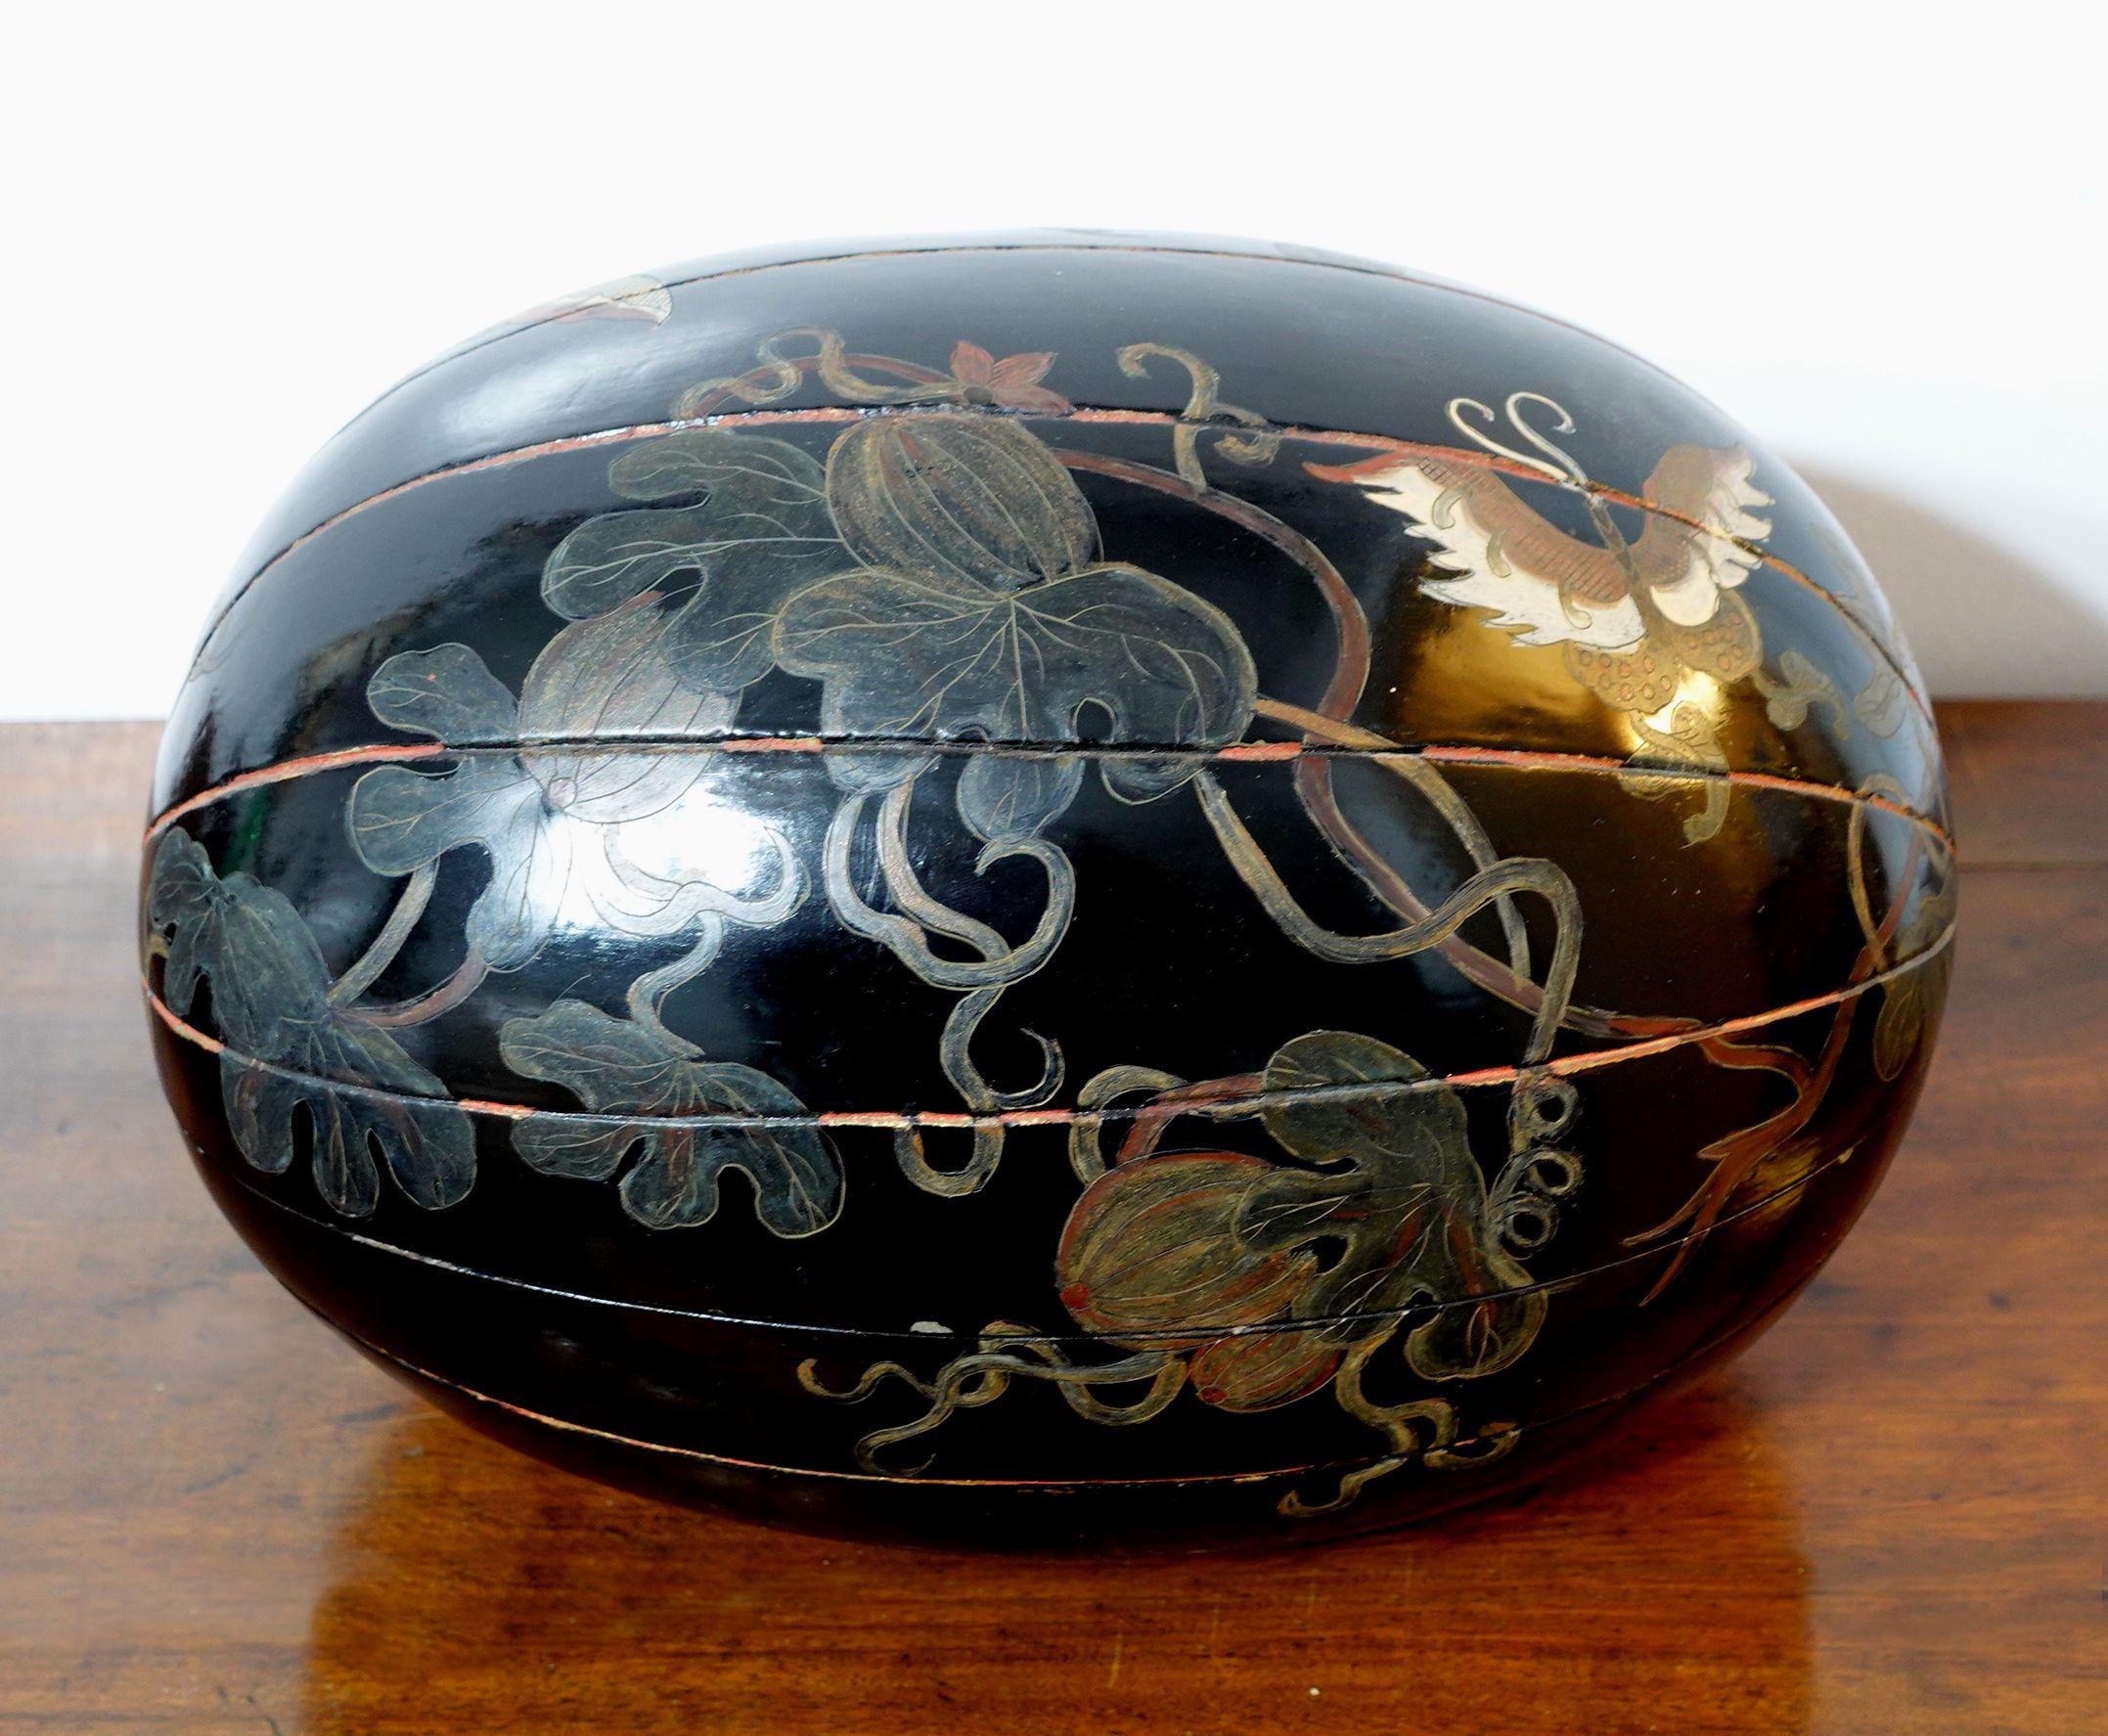 Japanese Large Lacquer Box with a Cover in Melon shape, depicting the melon with ivy branches, leaves, and butterflies. 